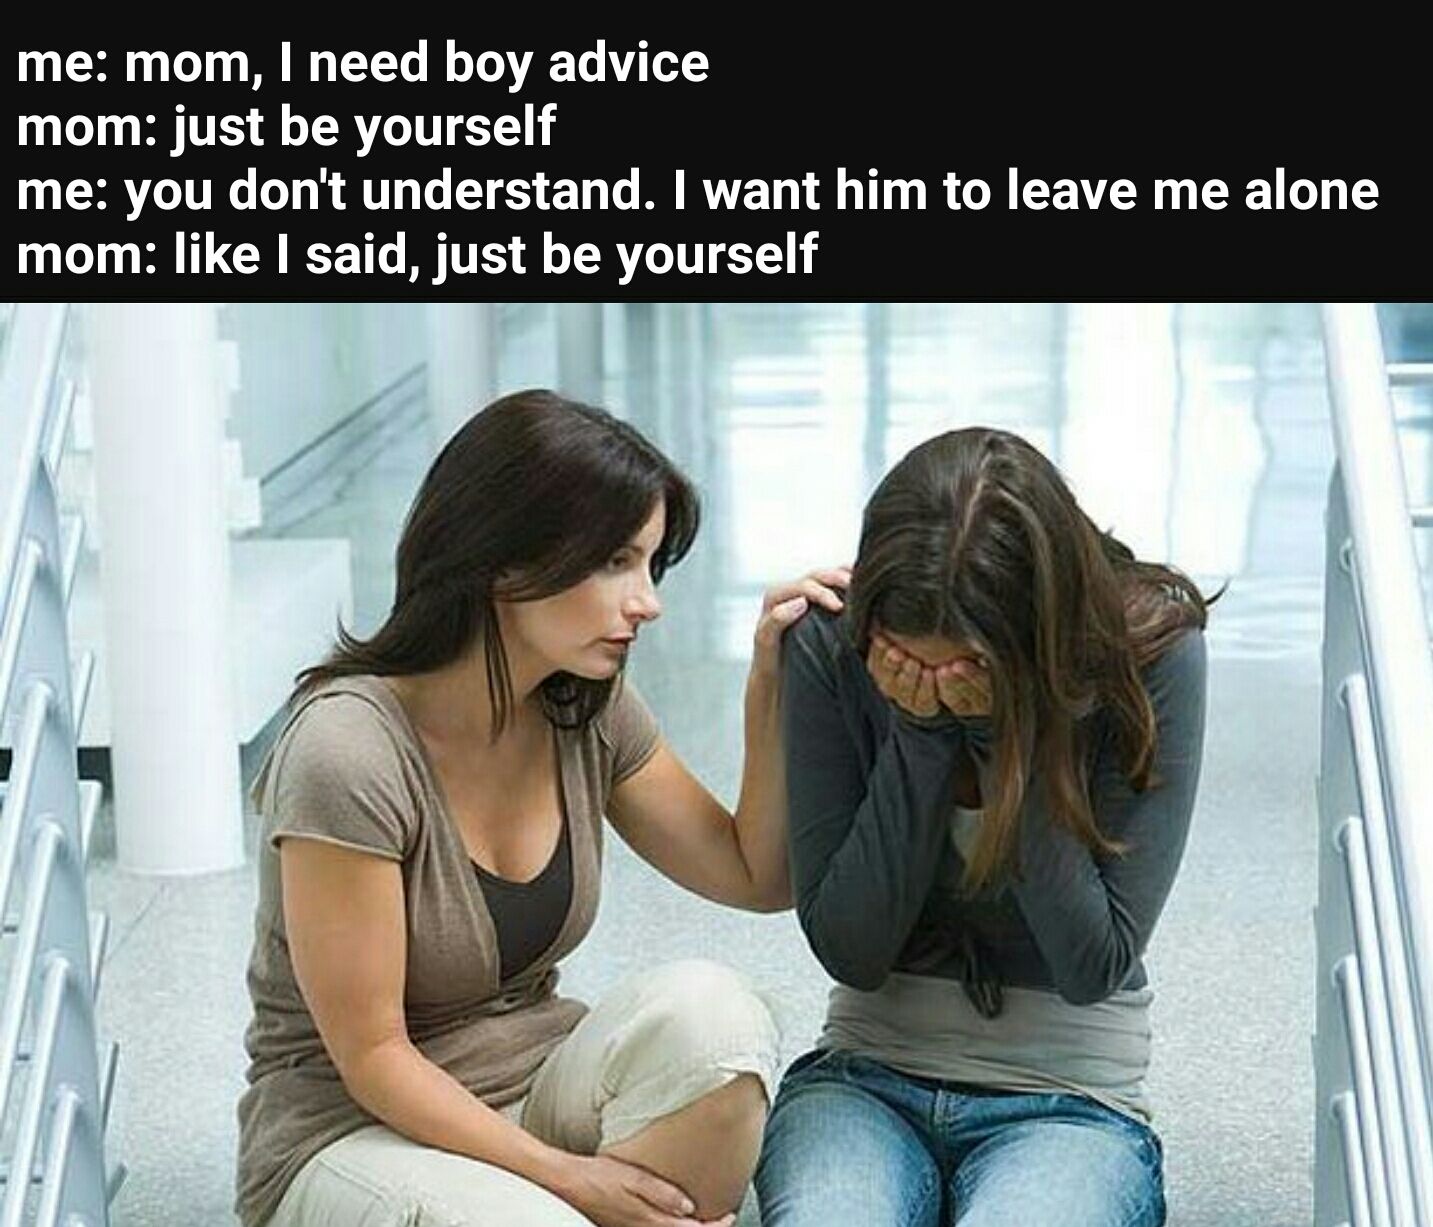 mother comforting teen daughter - me mom, I need boy advice mom just be yourself me you don't understand. I want him to leave me alone mom I said, just be yourself